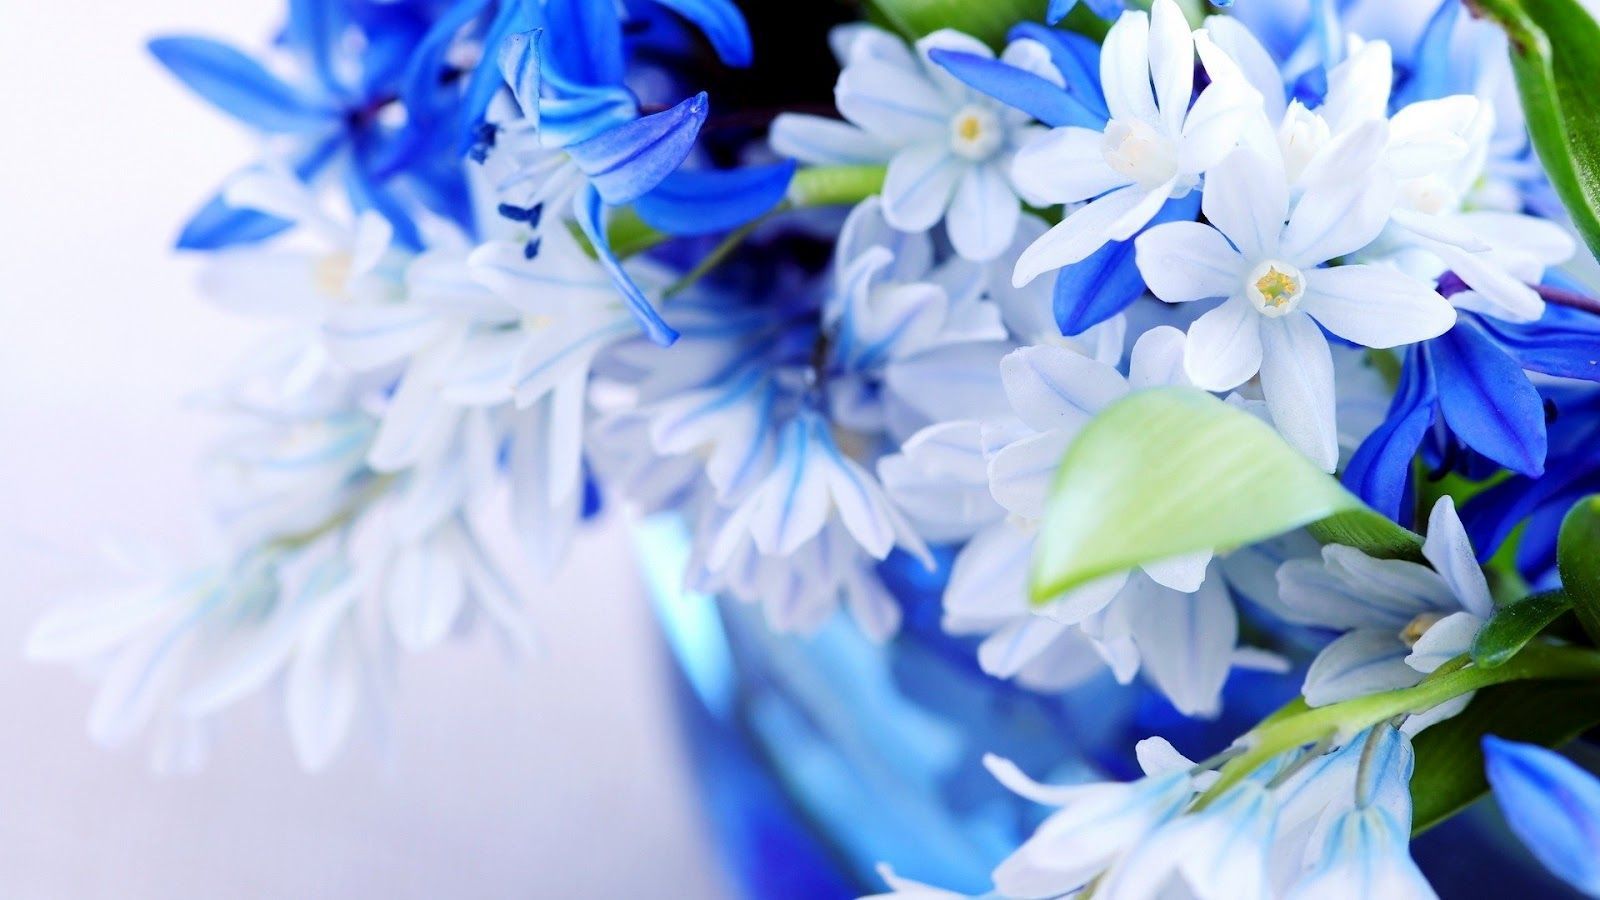 white and blue flowers image